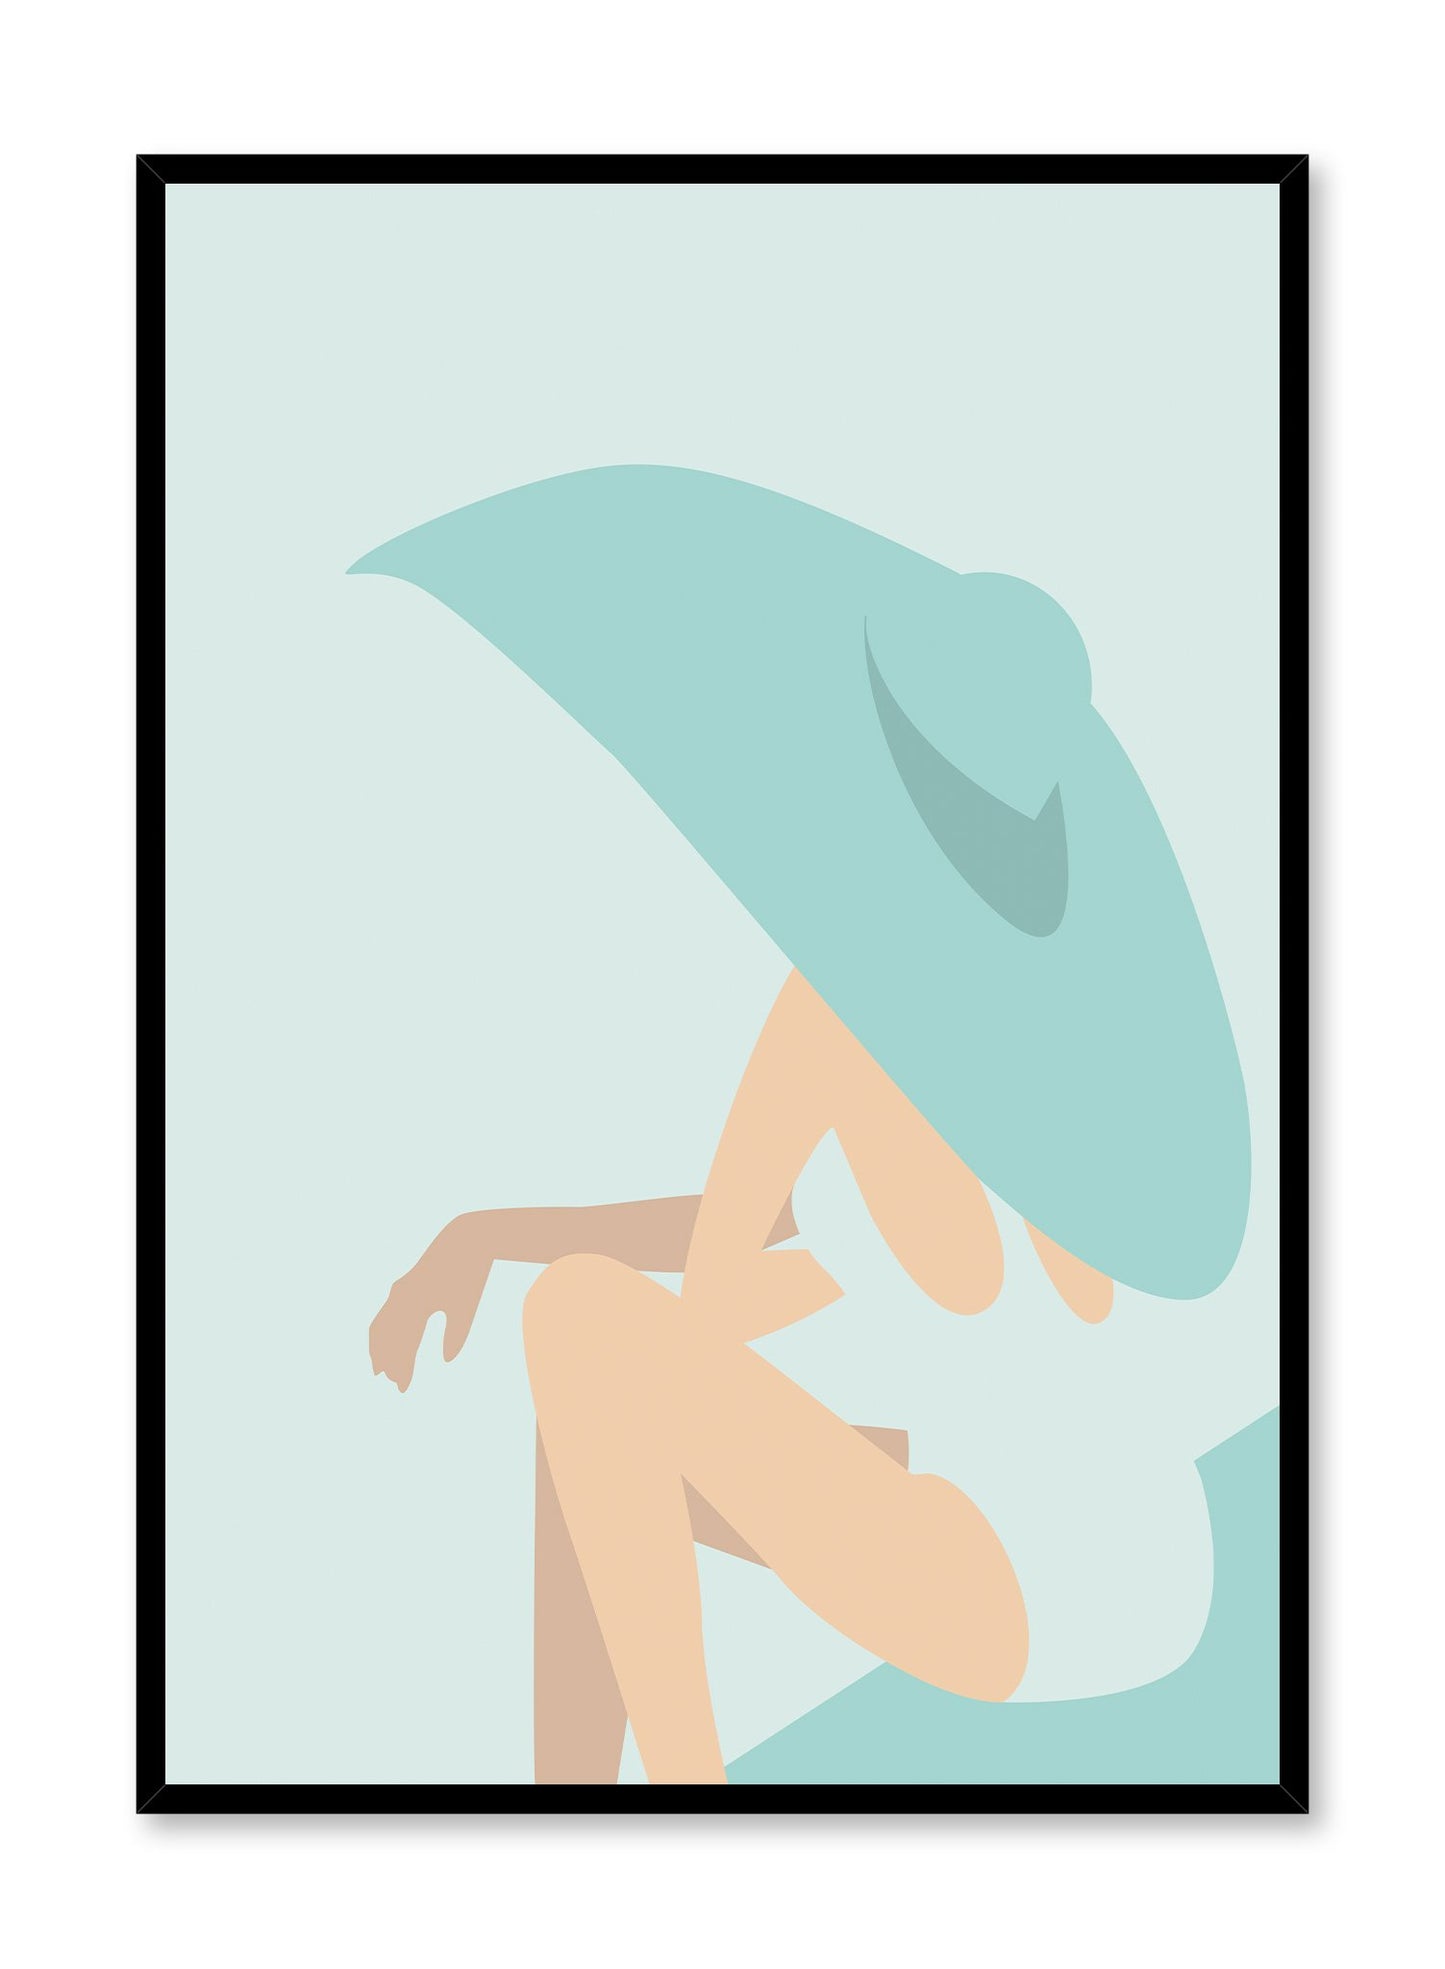 Poolside Diva in Aqua is a minimalist illustration poster of a woman sitting and wearing a large sunhat by Opposite Wall.